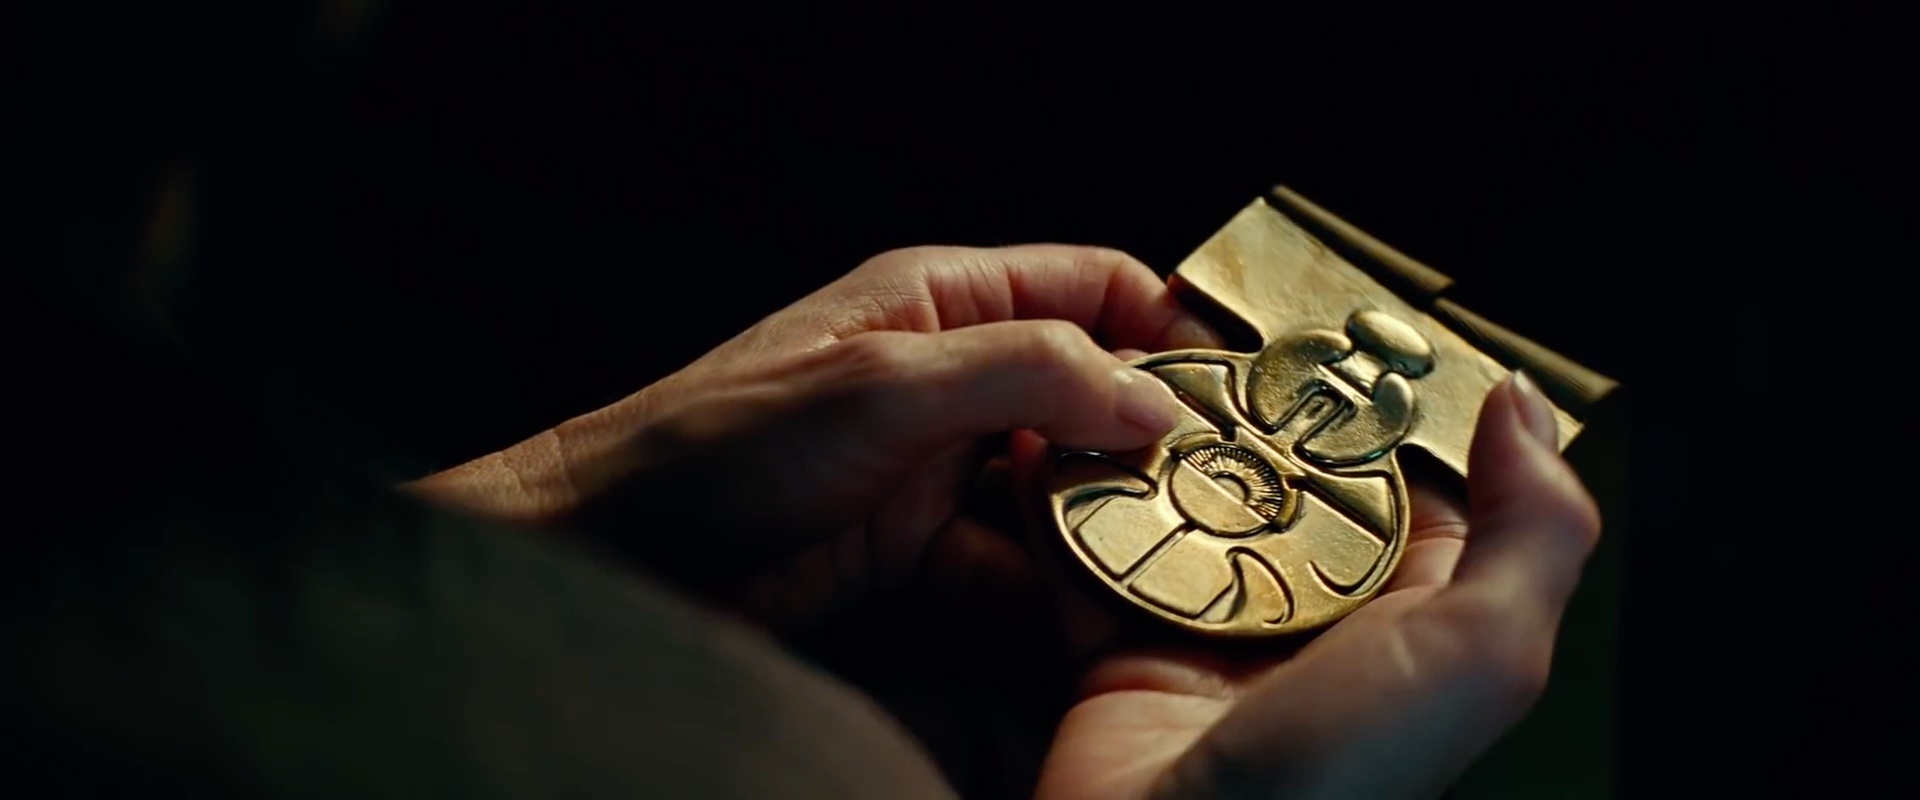 Han Solo's medal